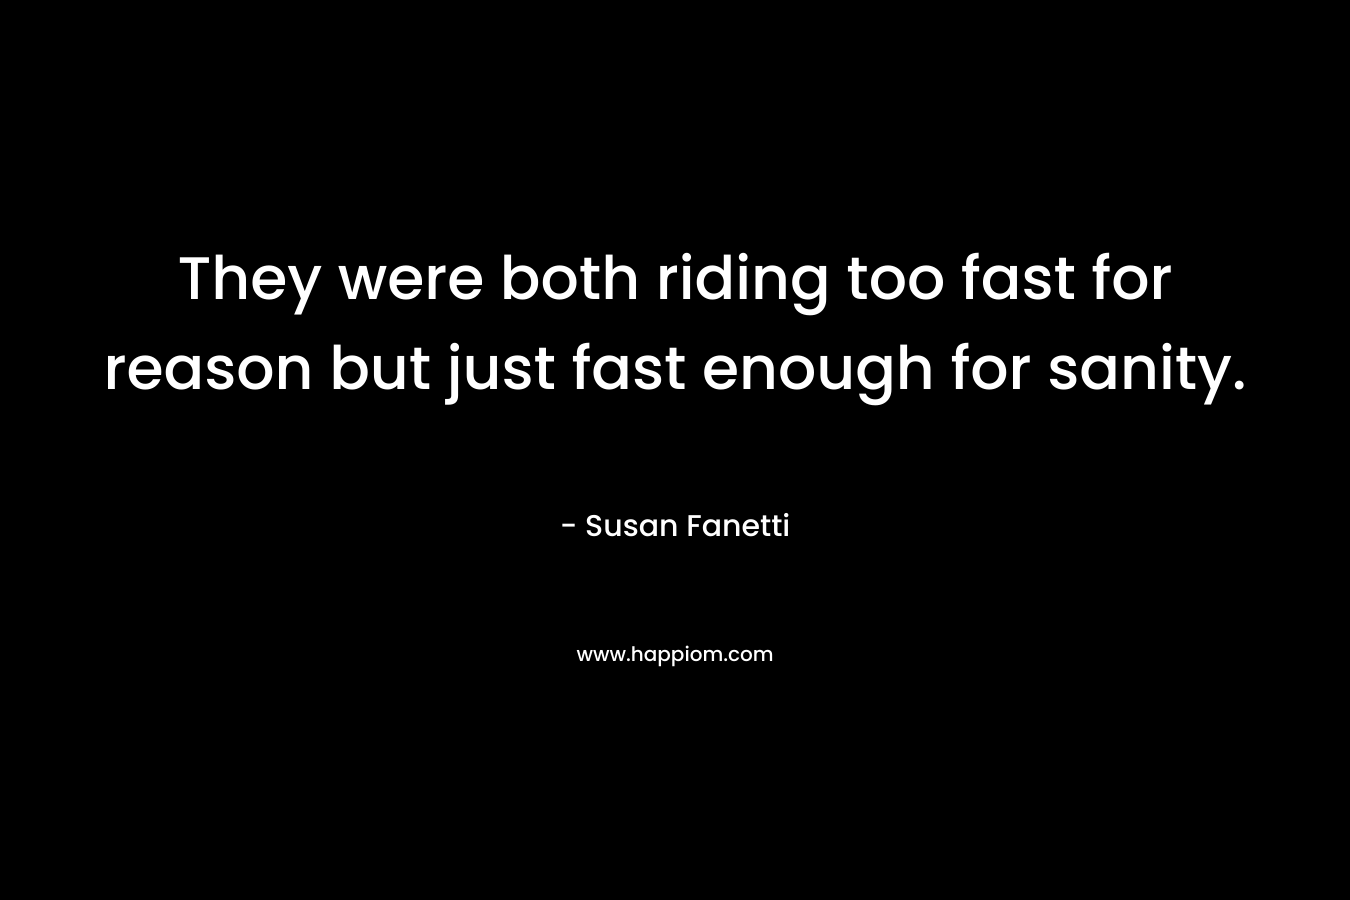 They were both riding too fast for reason but just fast enough for sanity.